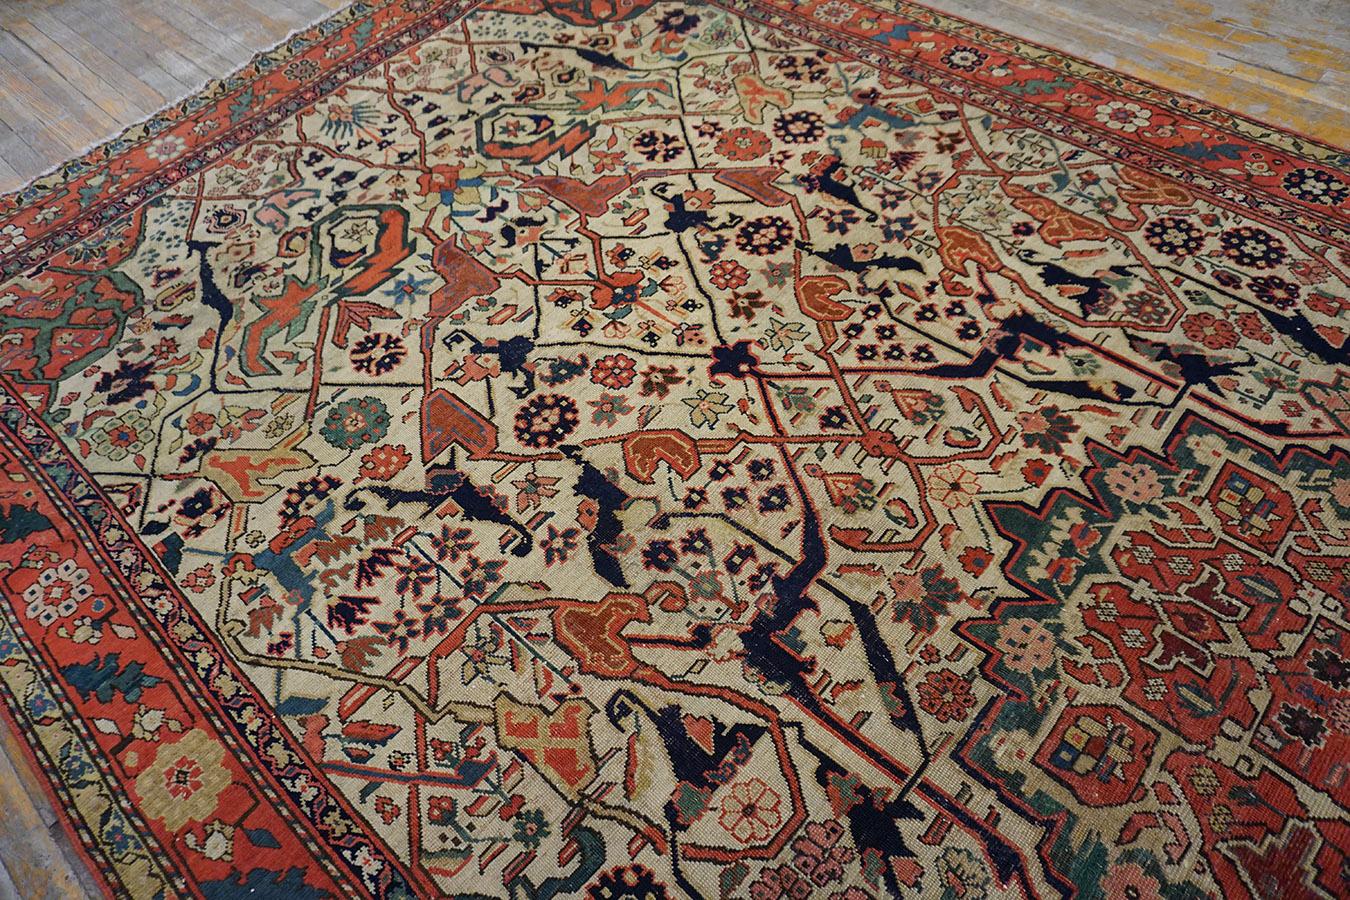 Hand-Knotted 19th Century Caucasian Karabagh Gallery Carpet ( 7' x 15'9